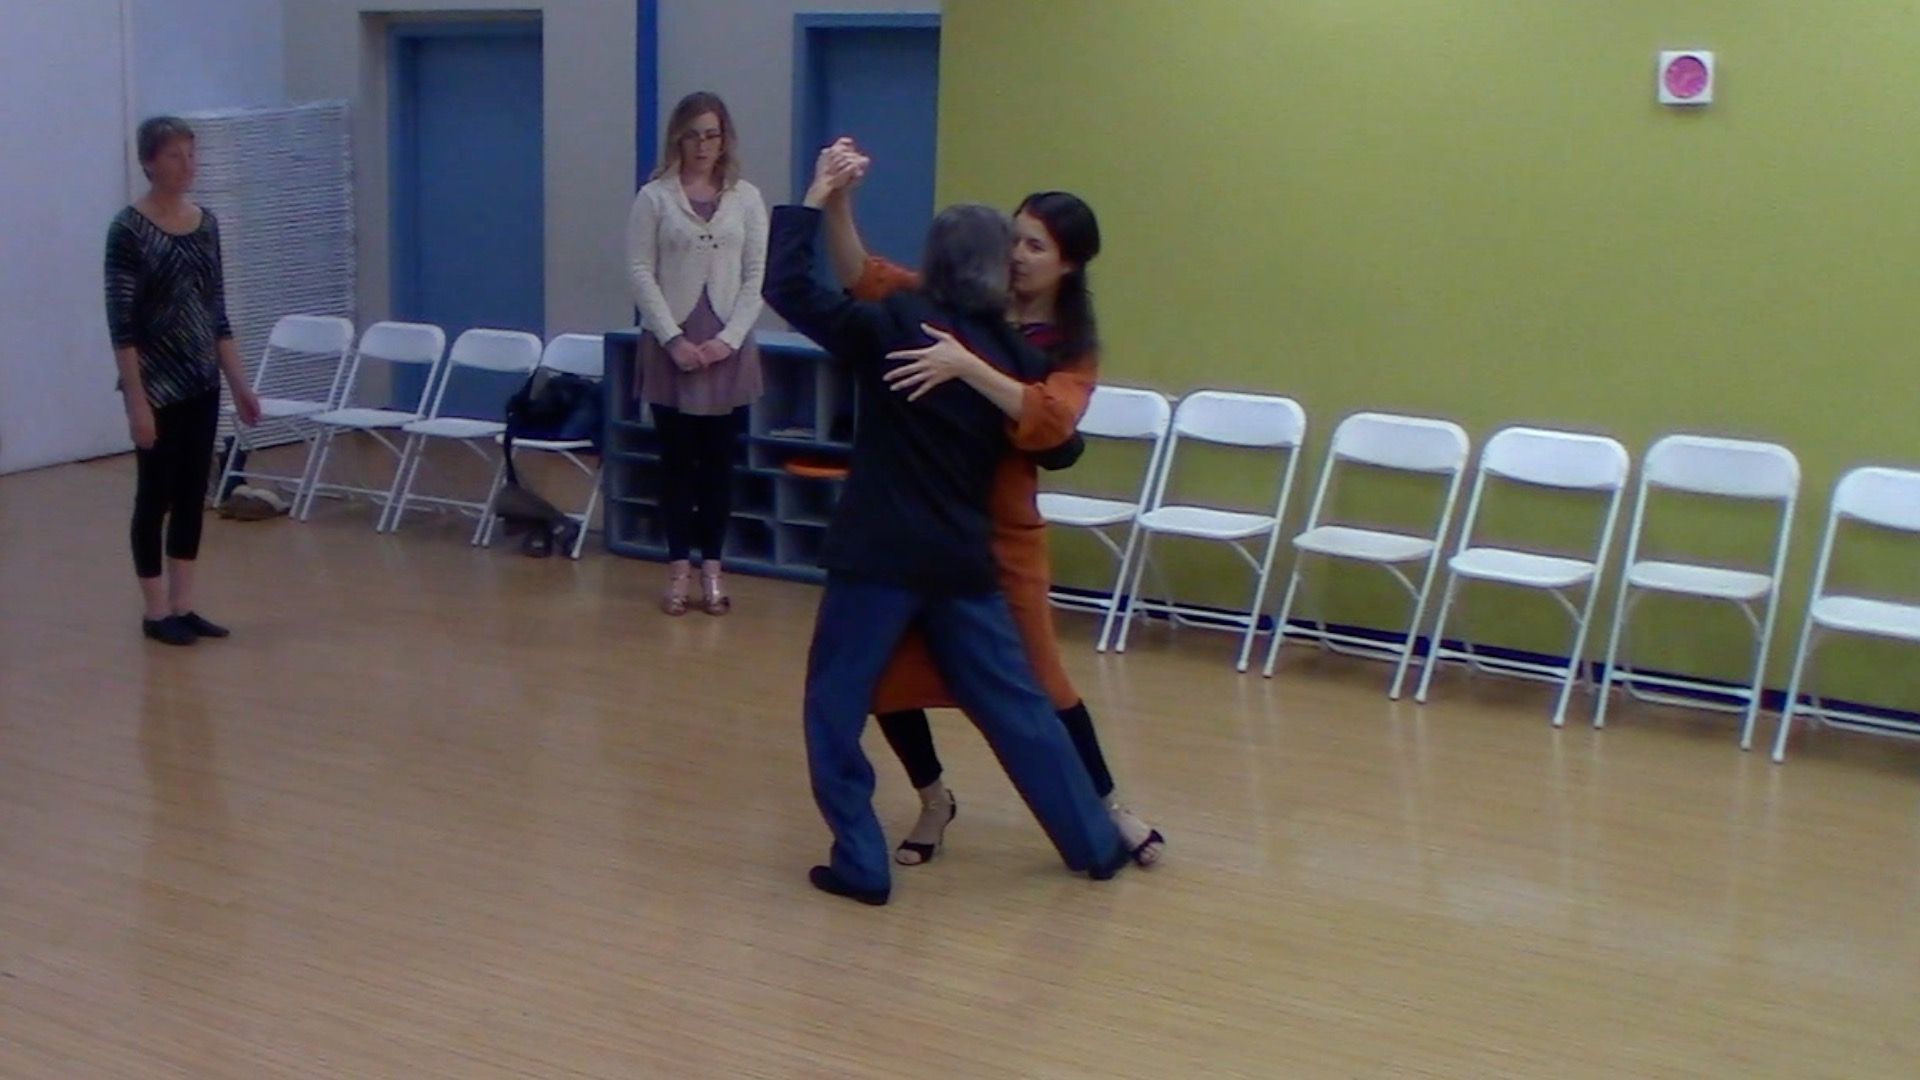 Argentine Tango dancing with Mimi at our beginner class